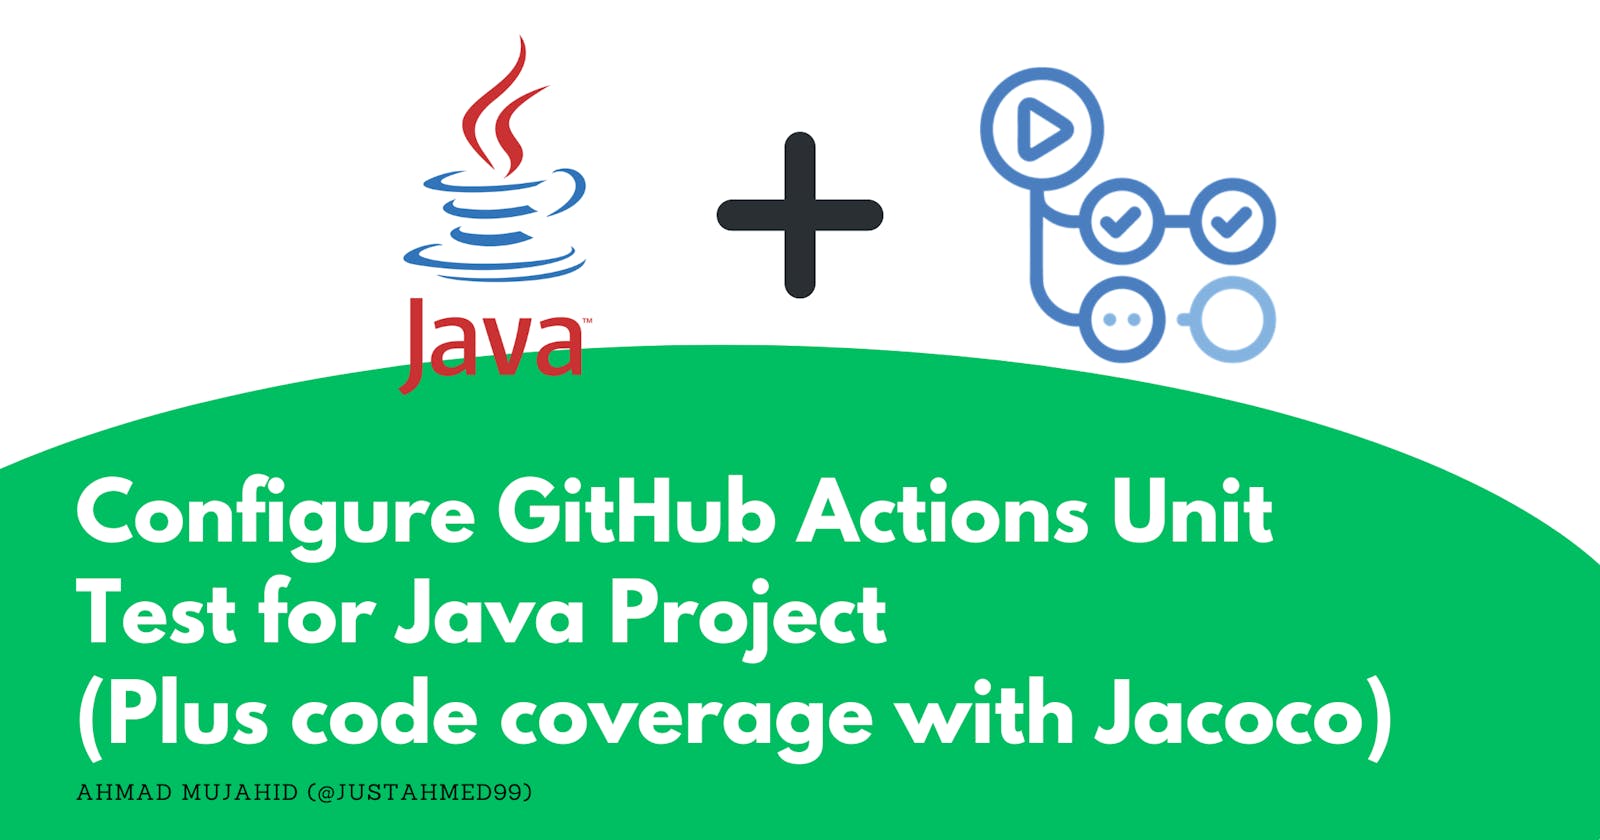 Configure GitHub Actions Unit Test for Java Project (Plus code coverage with Jacoco)